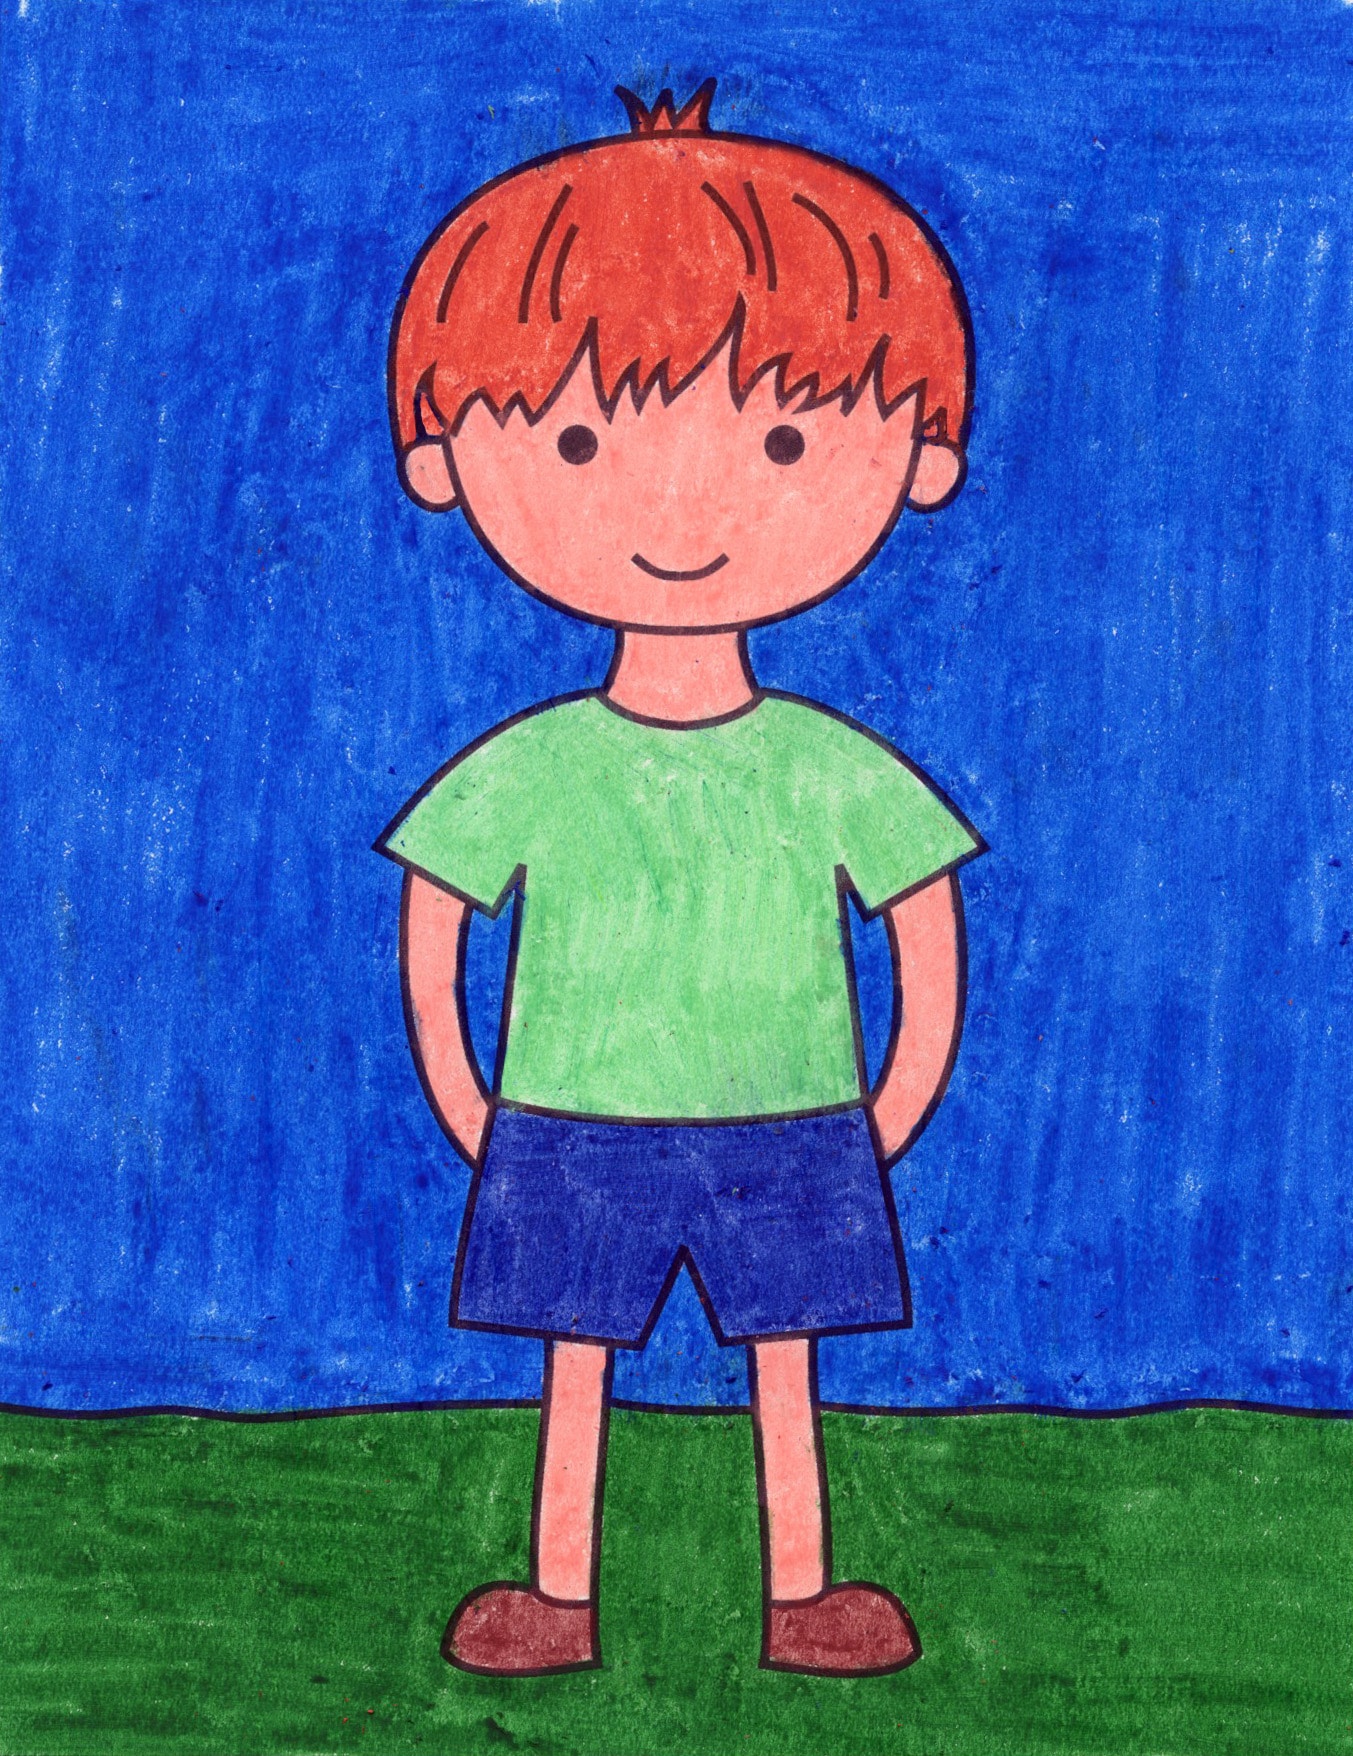 How To Draw A Boy In Shorts Art Projects For Kids Sketch boy side view face hand stock illustration. how to draw a boy in shorts art